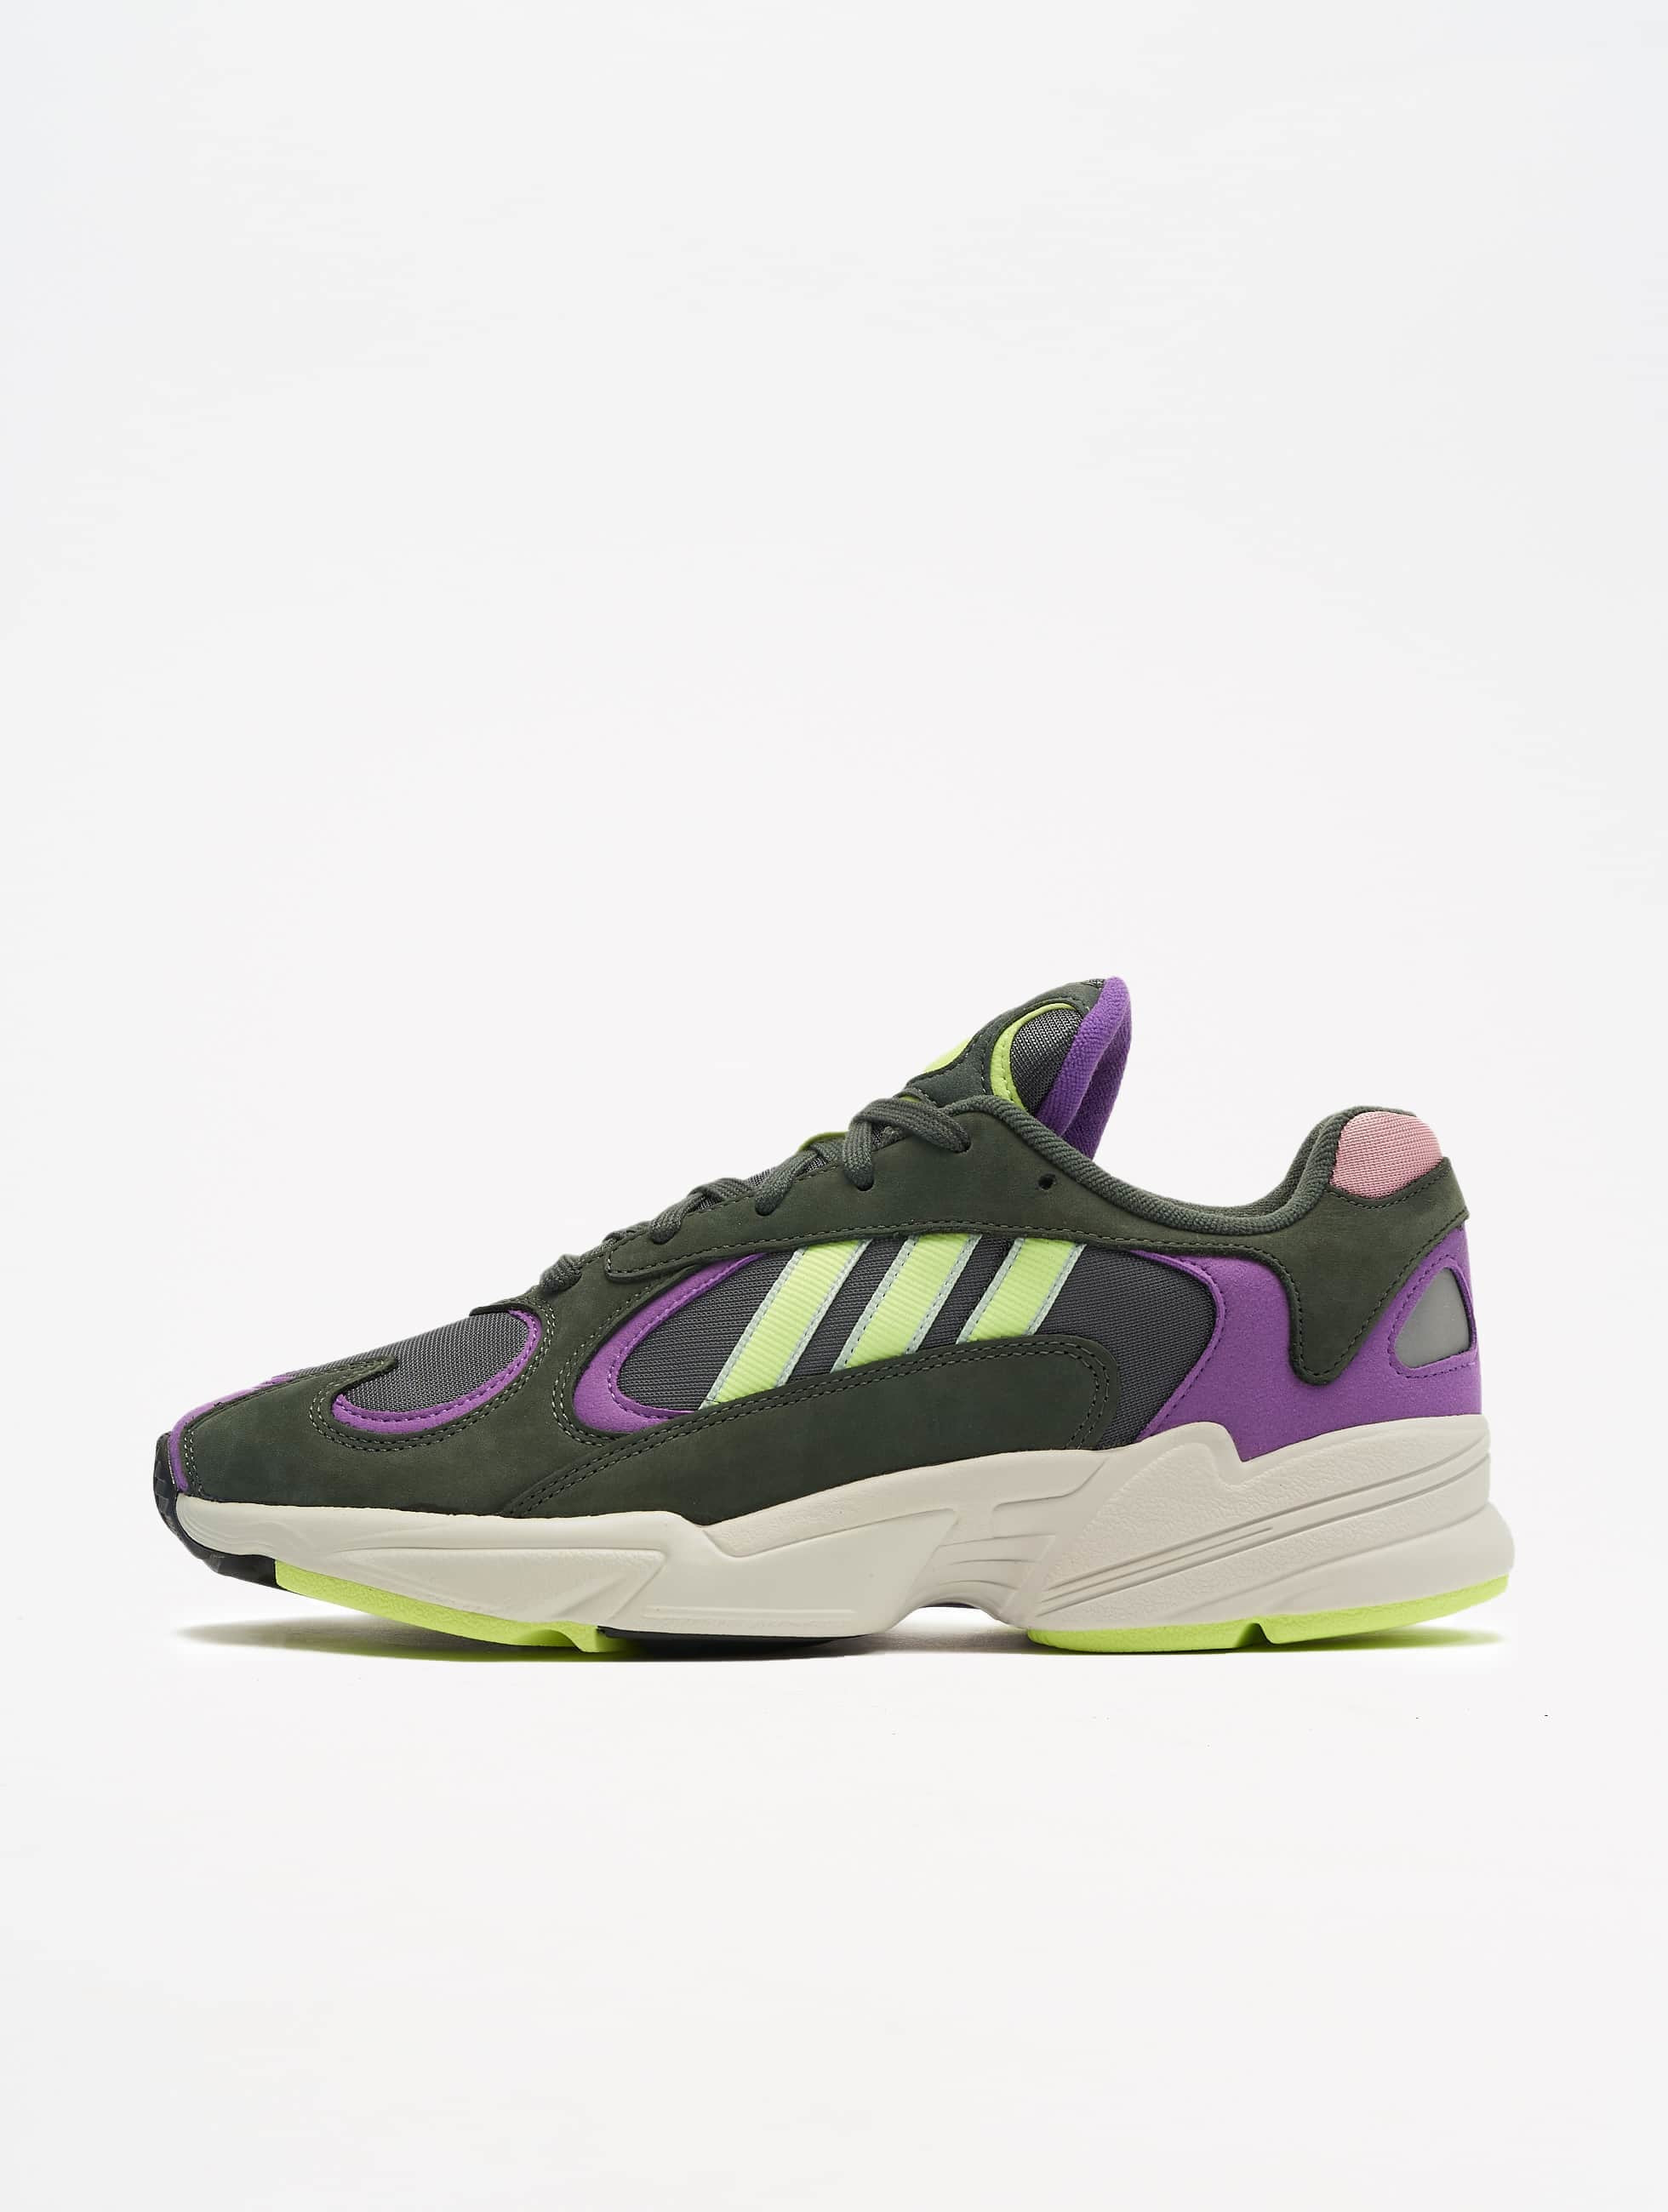 adidas yung 1 homme violet